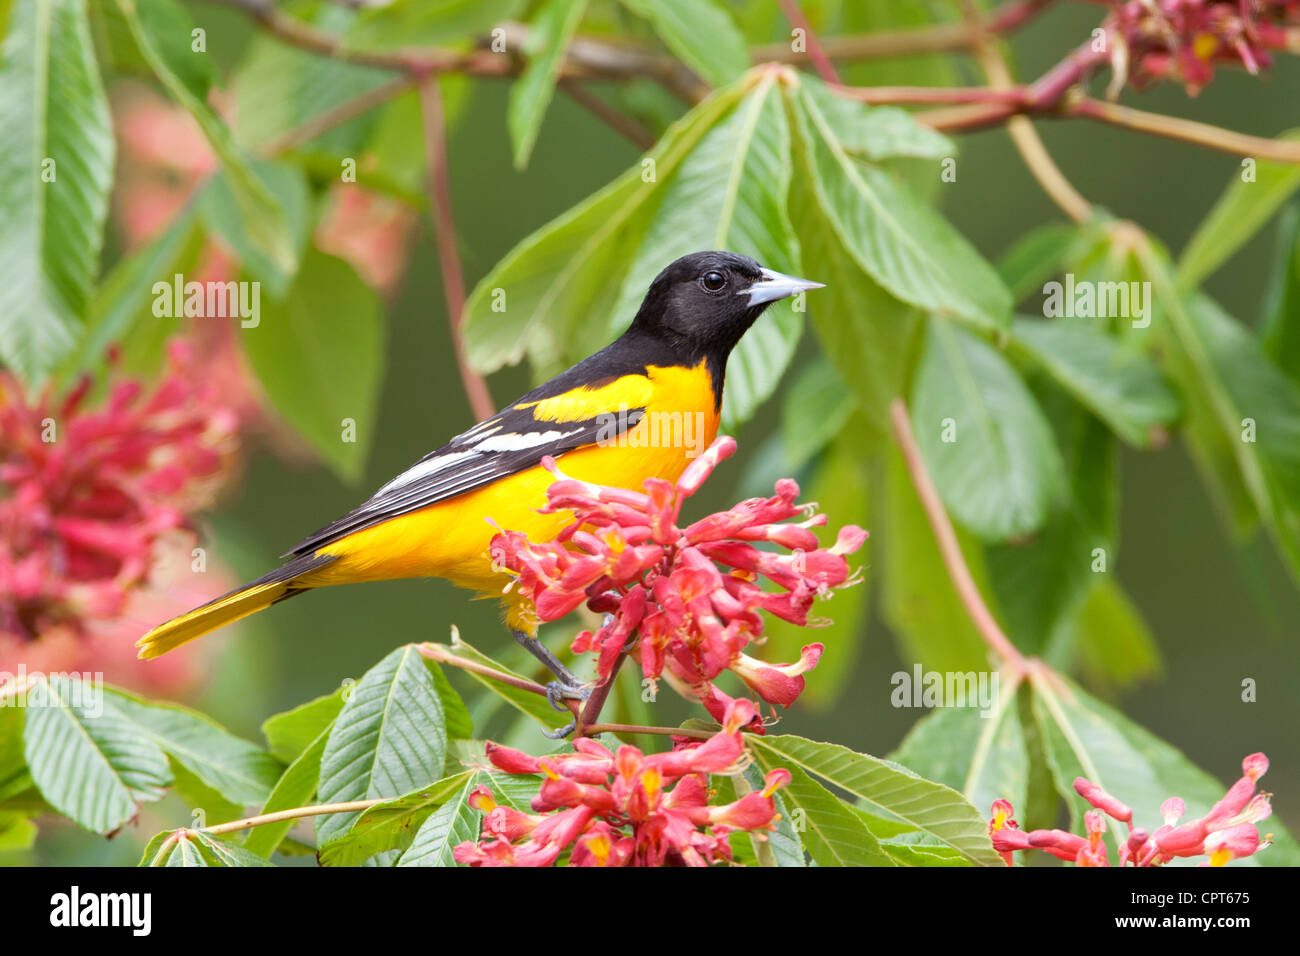 Baltimore Oriole bird songbird perching perched in Red Buckeye Tree Blossoms flowers blooms Stock Photo